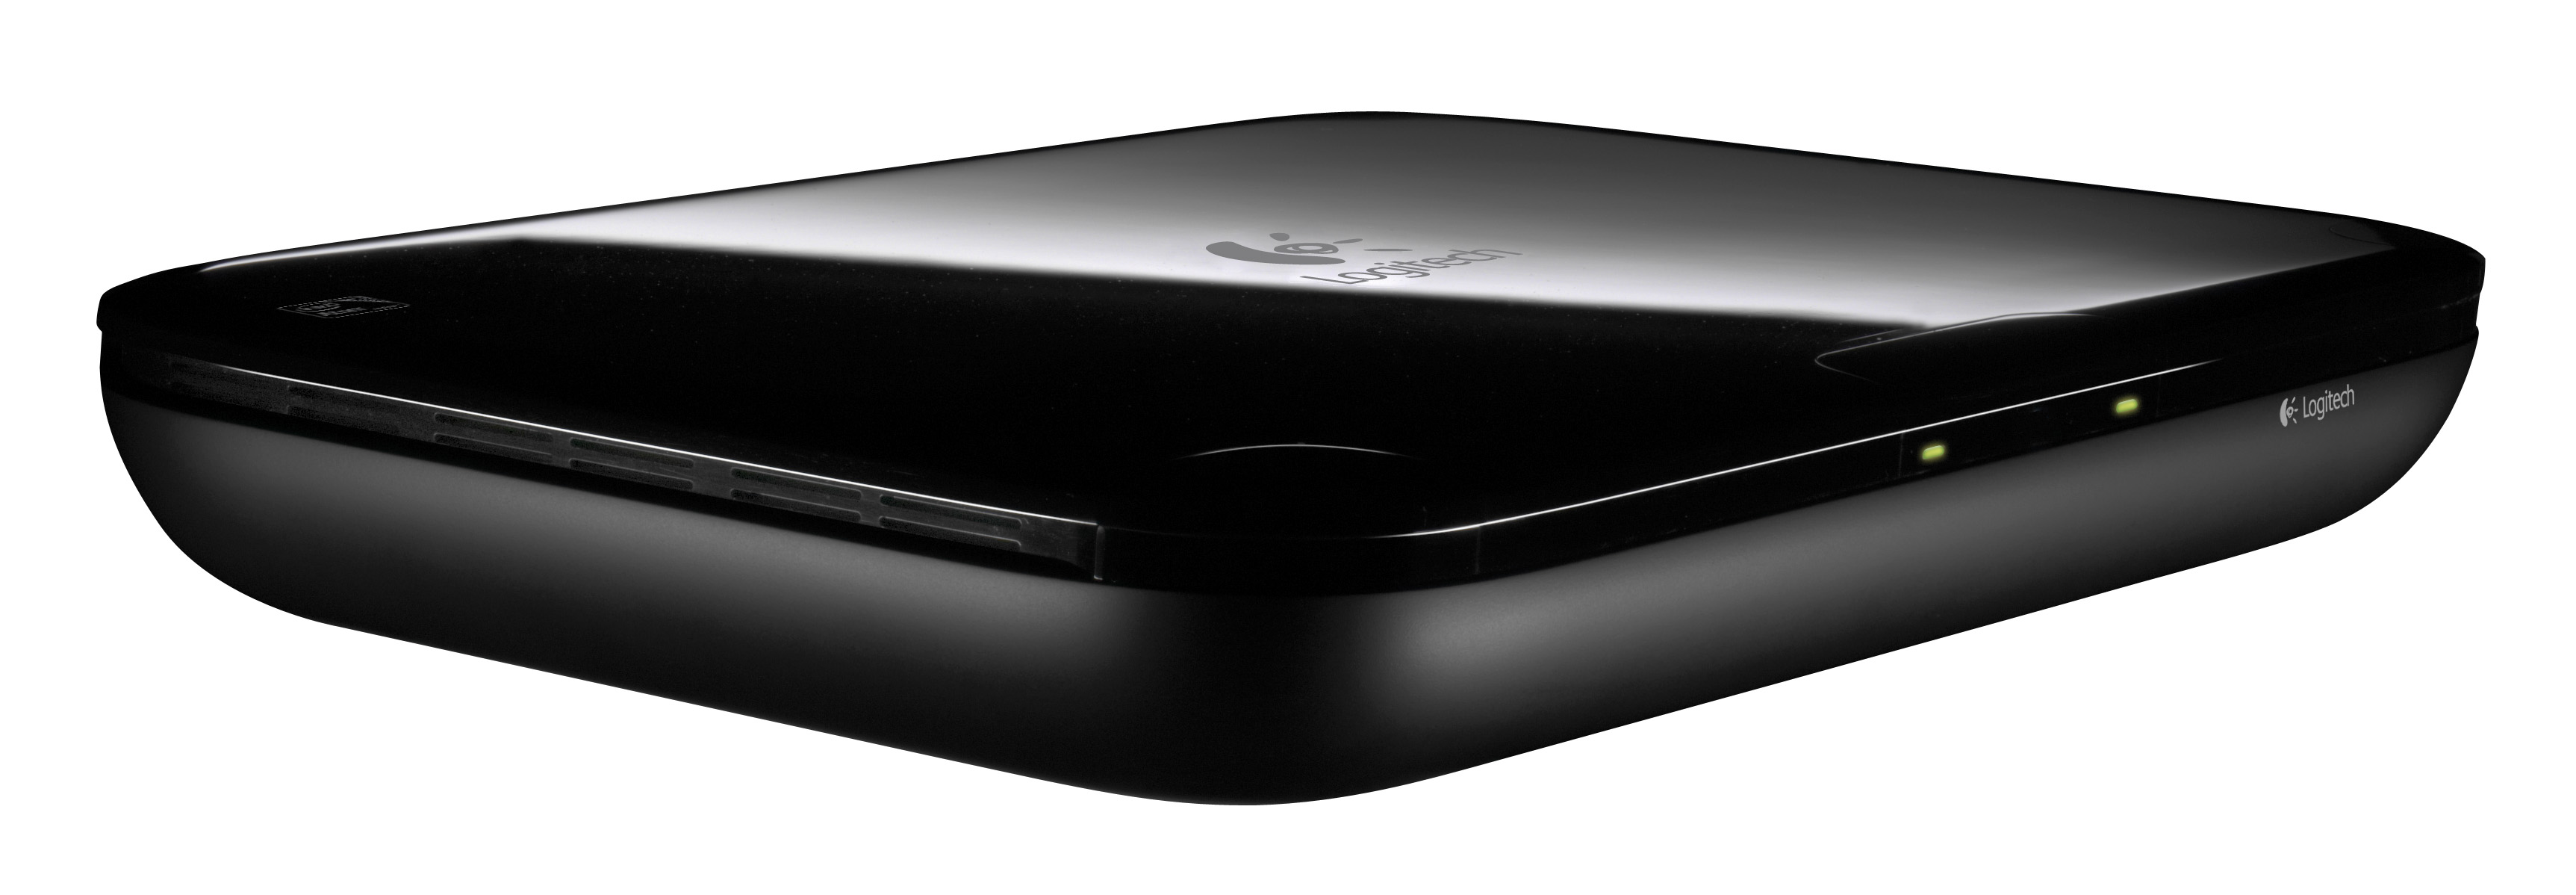 Logitech Revue Works with Your Cable Satellite Provider | logi BLOG